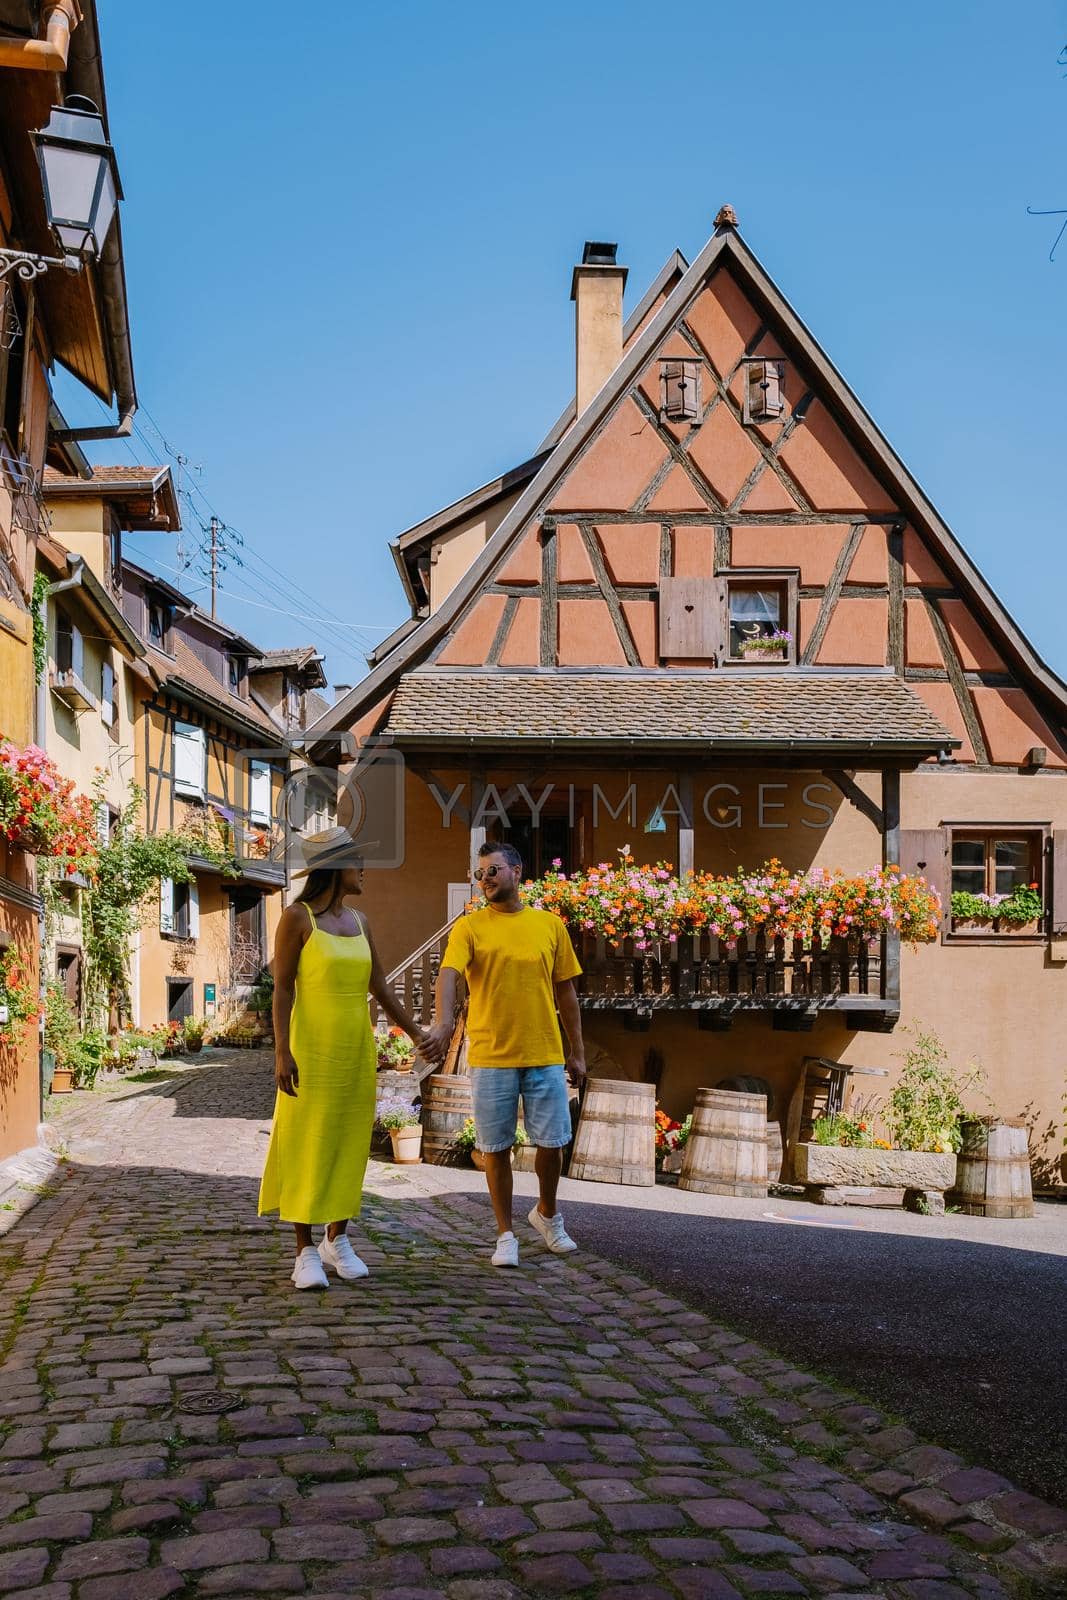 Royalty free image of Eguisheim, Alsace, France,Traditional colorful halt-timbered houses in Eguisheim Old Town on Alsace Wine Route, France by fokkebok